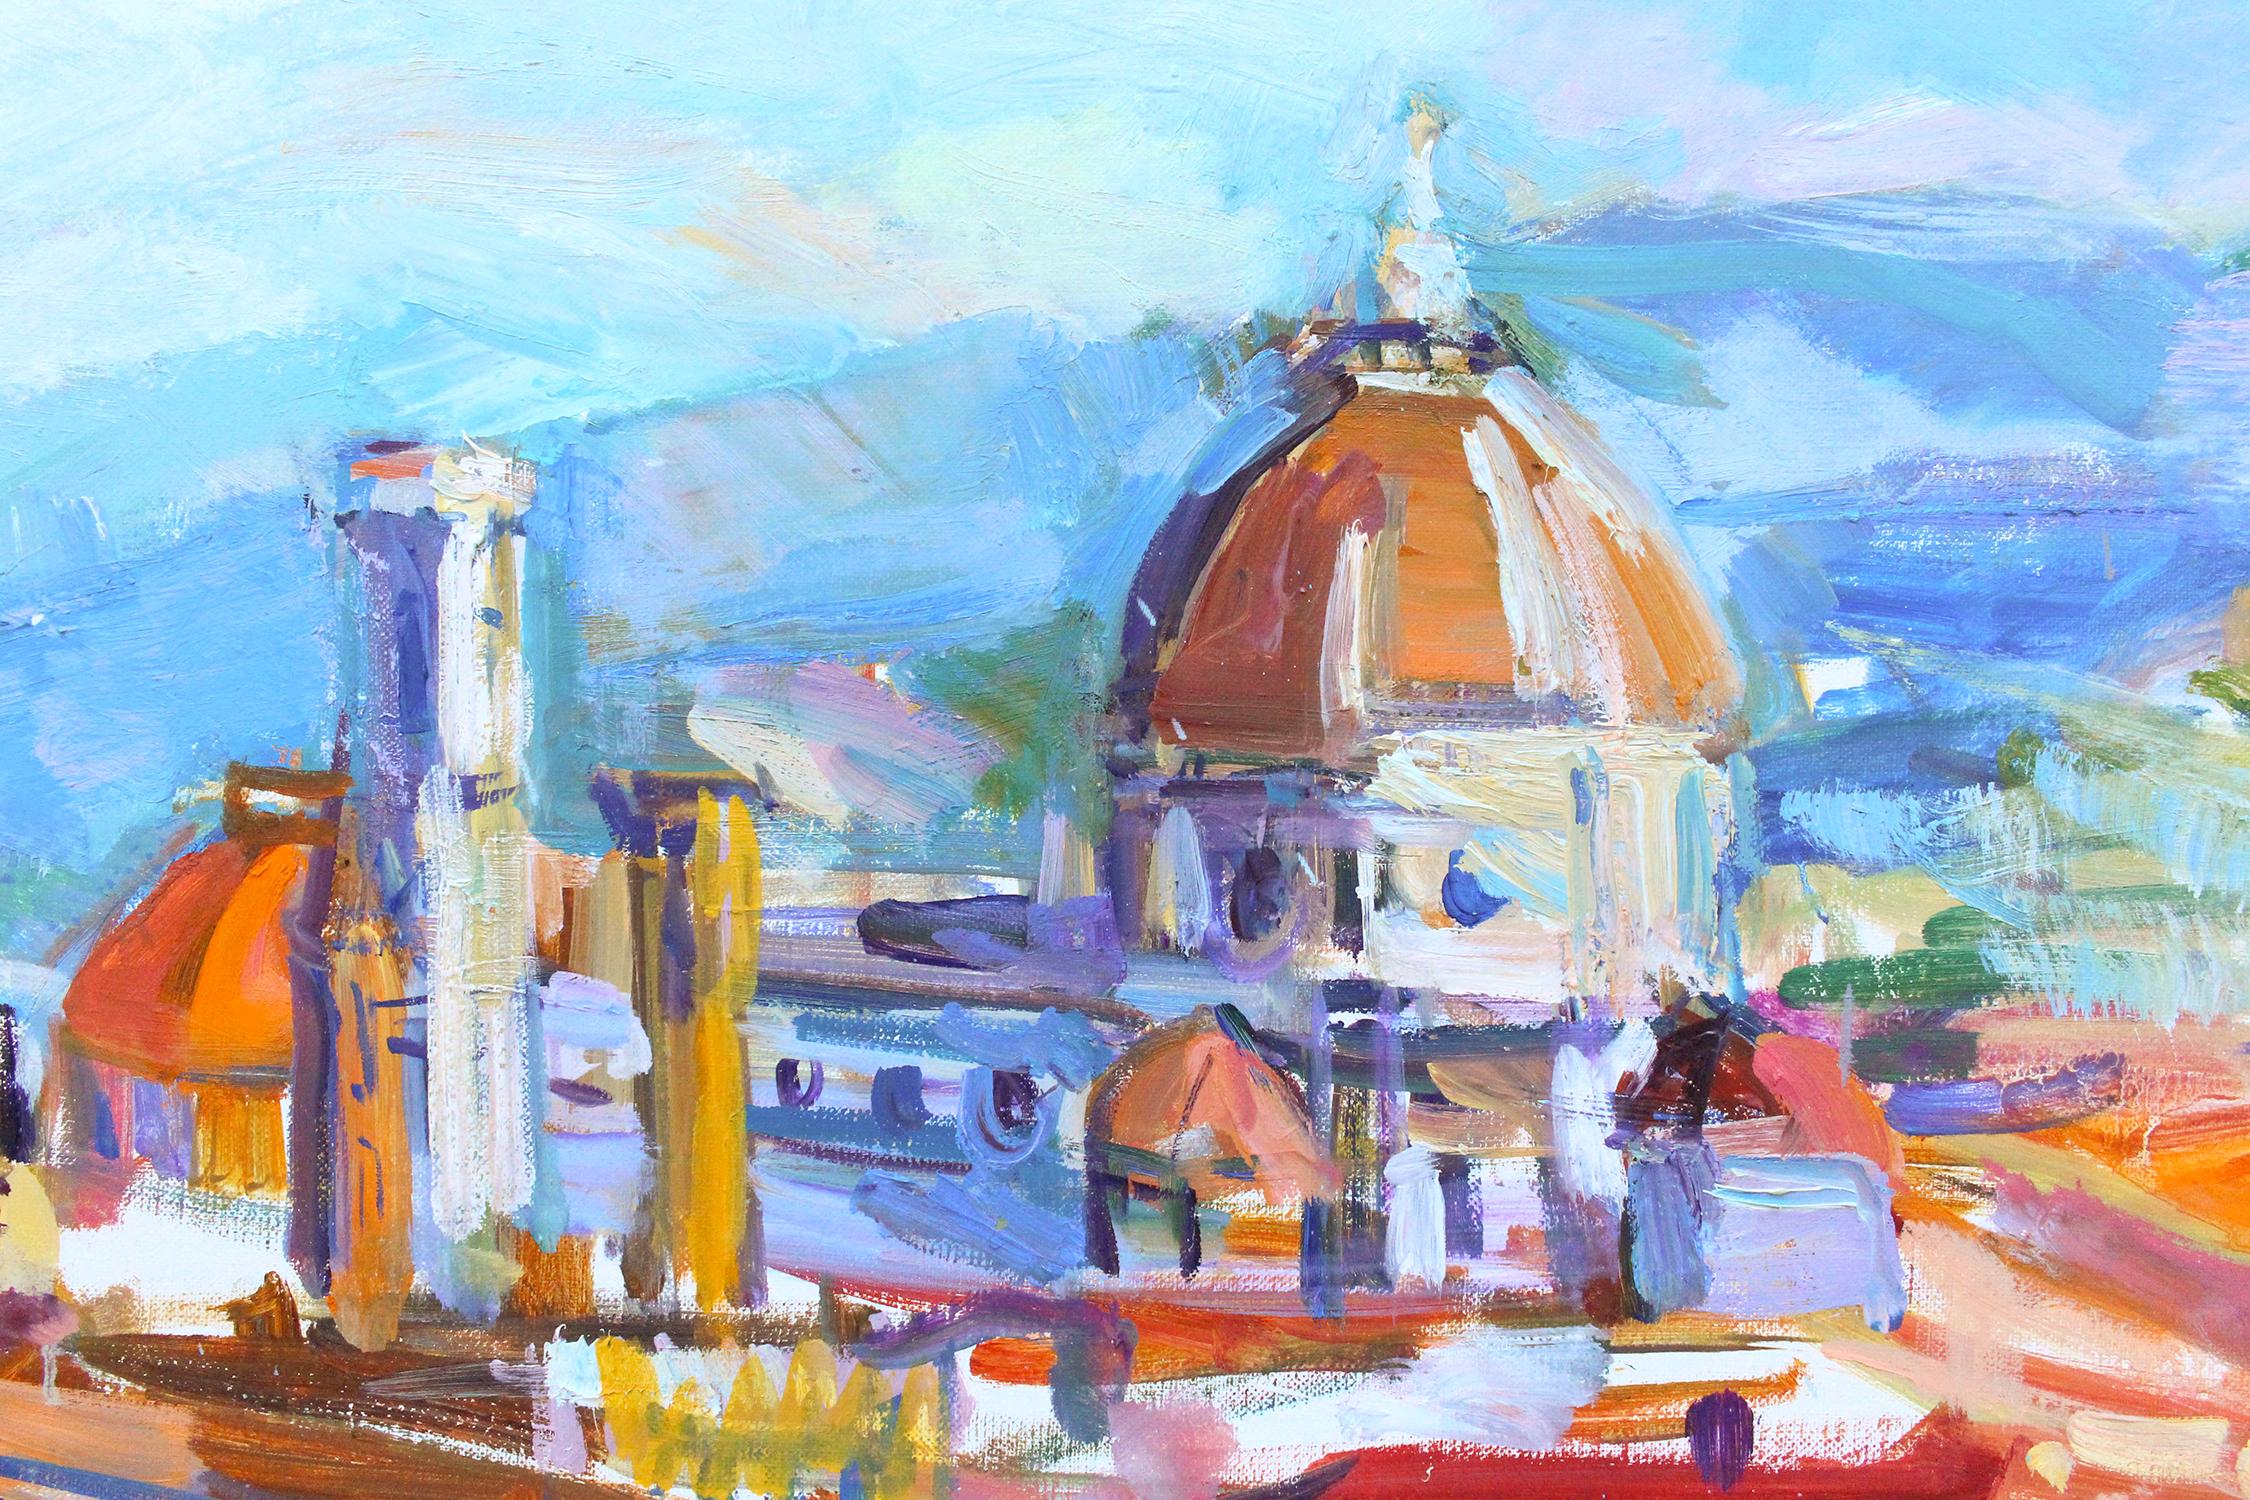 Florence Piazza Michelangelo - Painting by Sonia Grineva